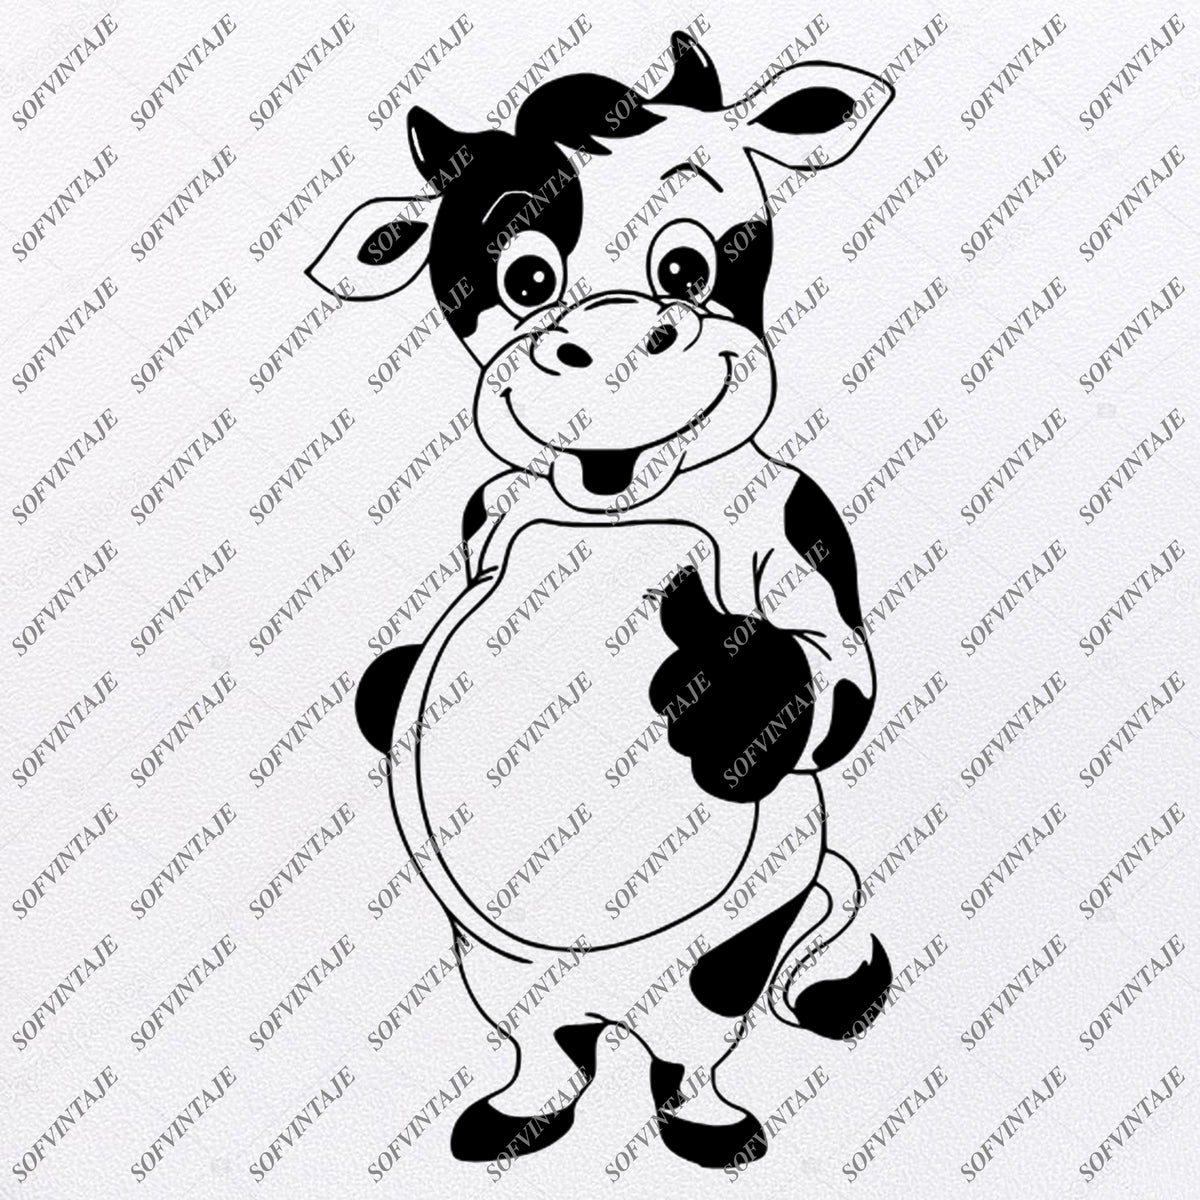 Download Cow Svg File - Funny Caw Svg - Cow Clip art - Animals Svg ...